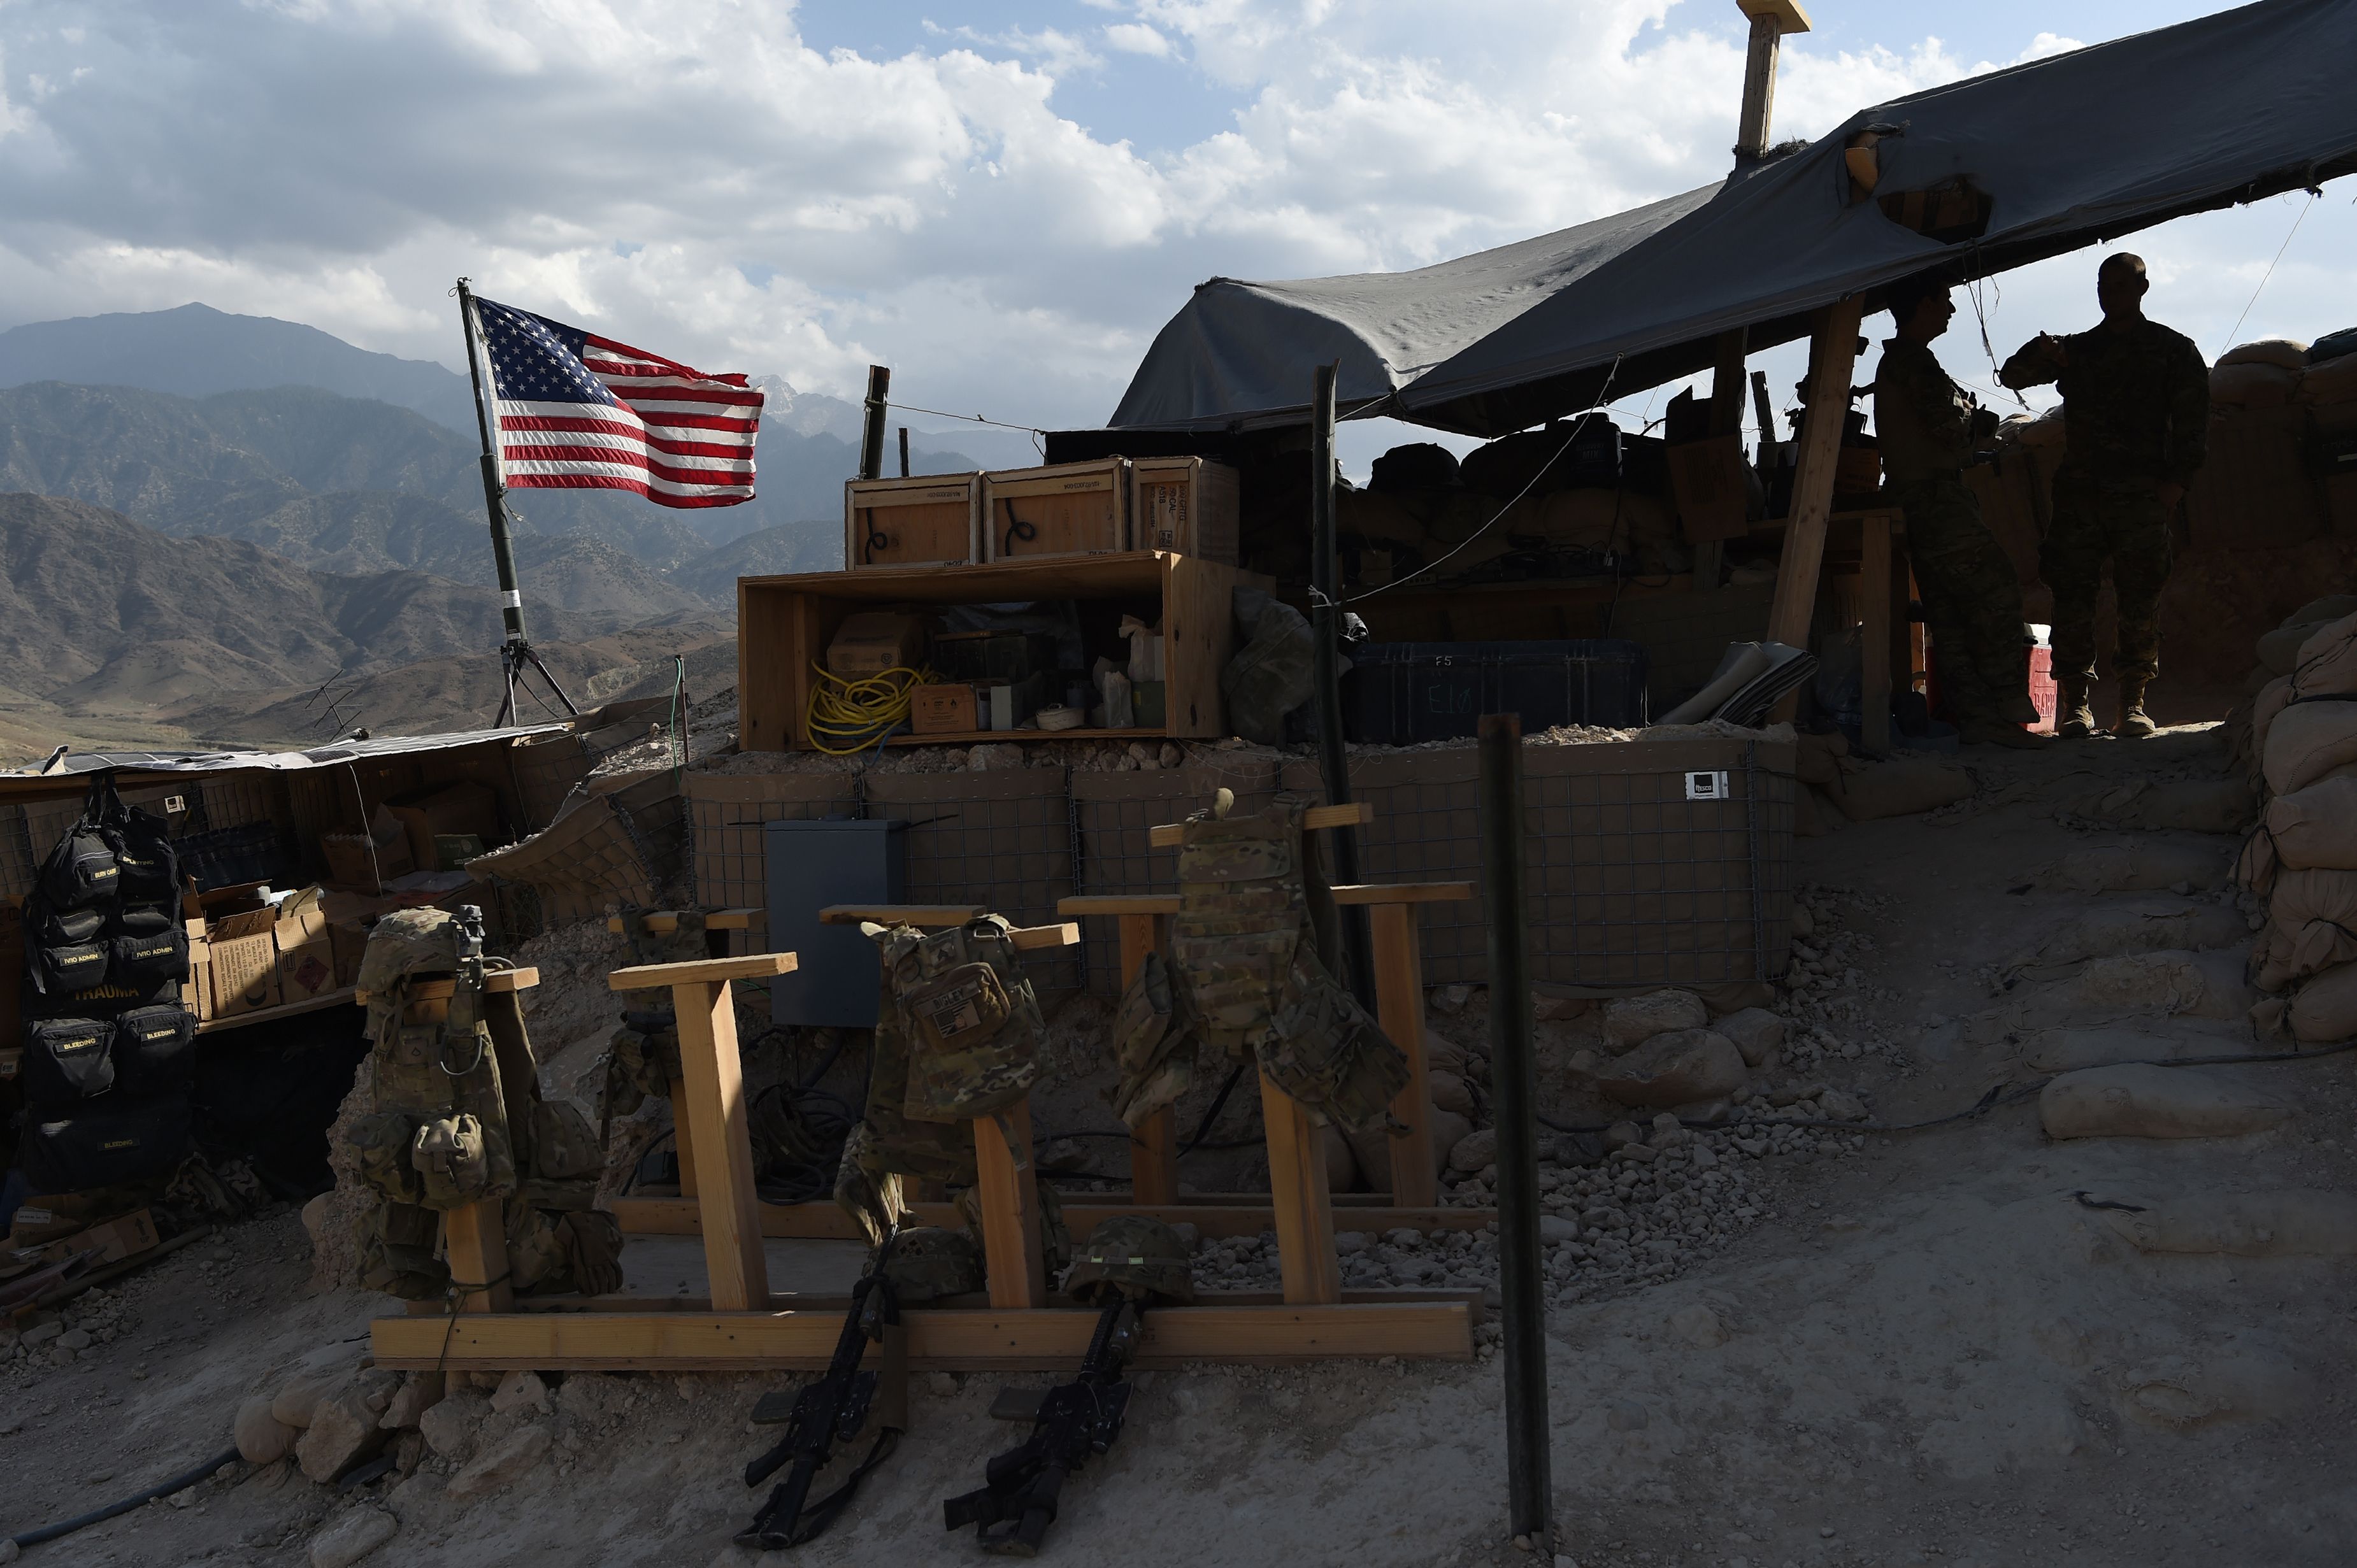 U.S. Army soldiers from NATO look on as the U.S. flag flies at a checkpoint during a patrol against Islamic State militants in Nangarhar Province, Afghanistan on July 7, 2018. (Wakil Kohsar&mdash;AFP/Getty Images)